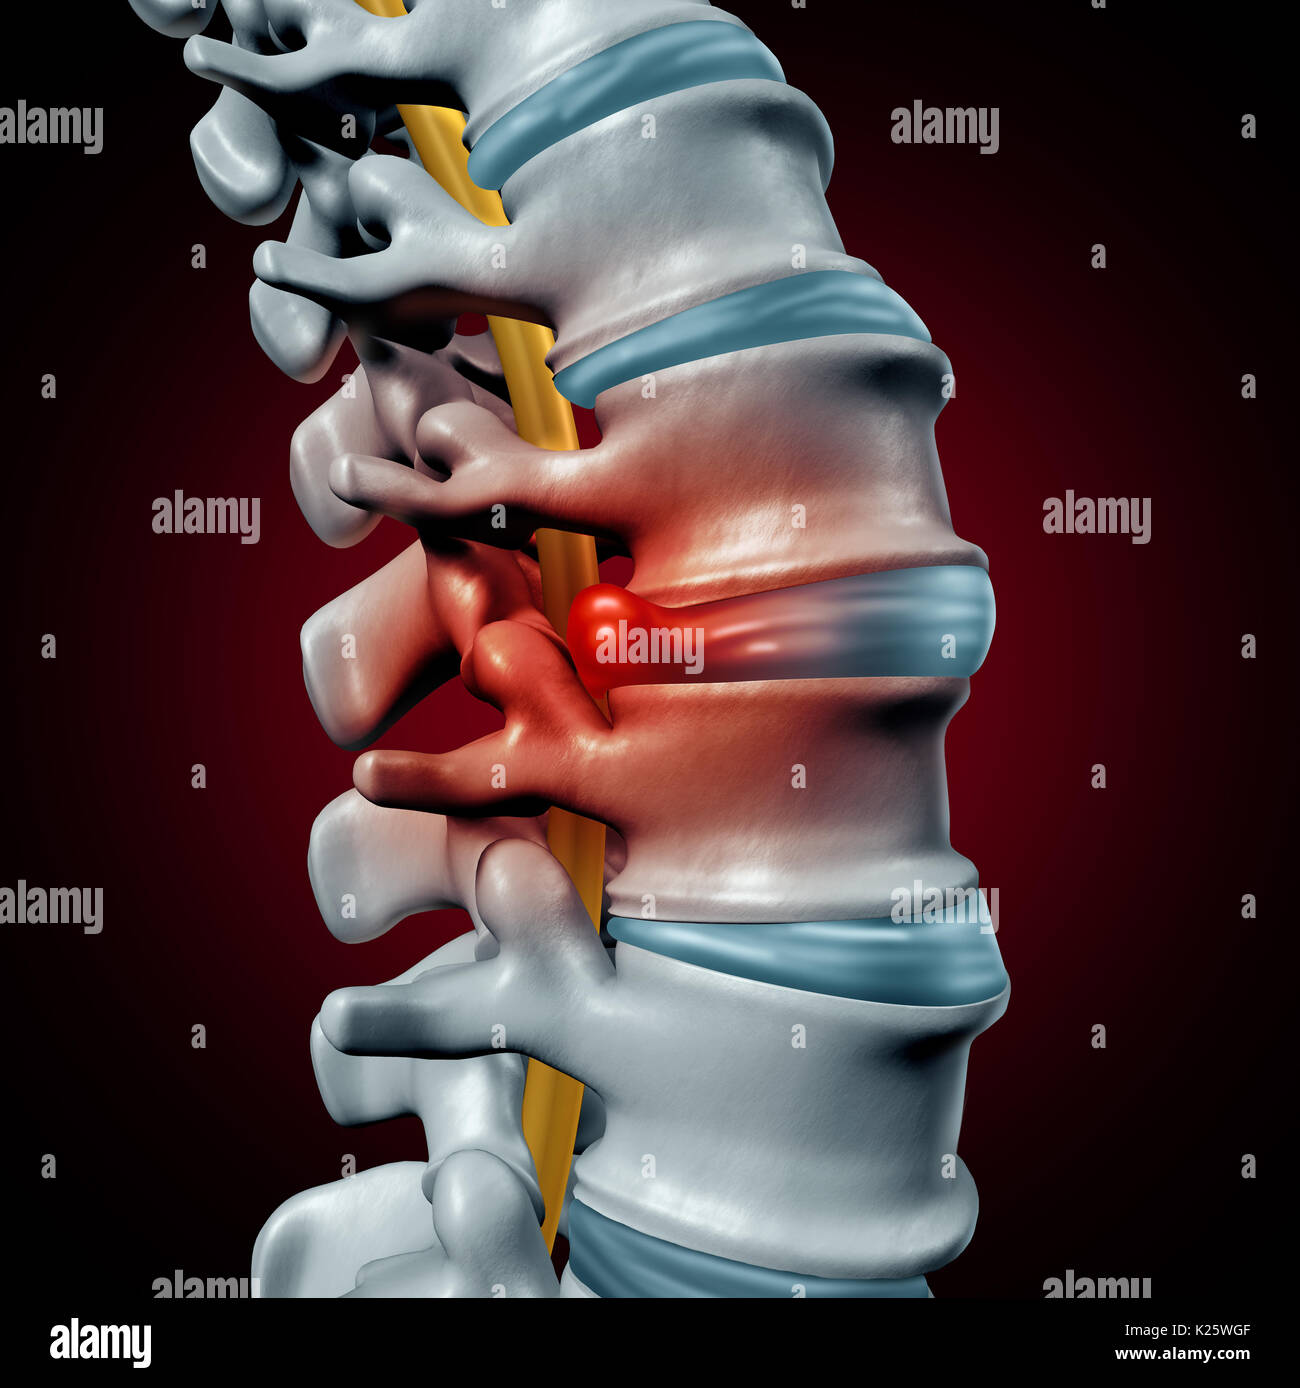 Human herniated disk concept and spine pain diagnostic as a human spinal system symbol as medical health problem and anatomy symbol. Stock Photo